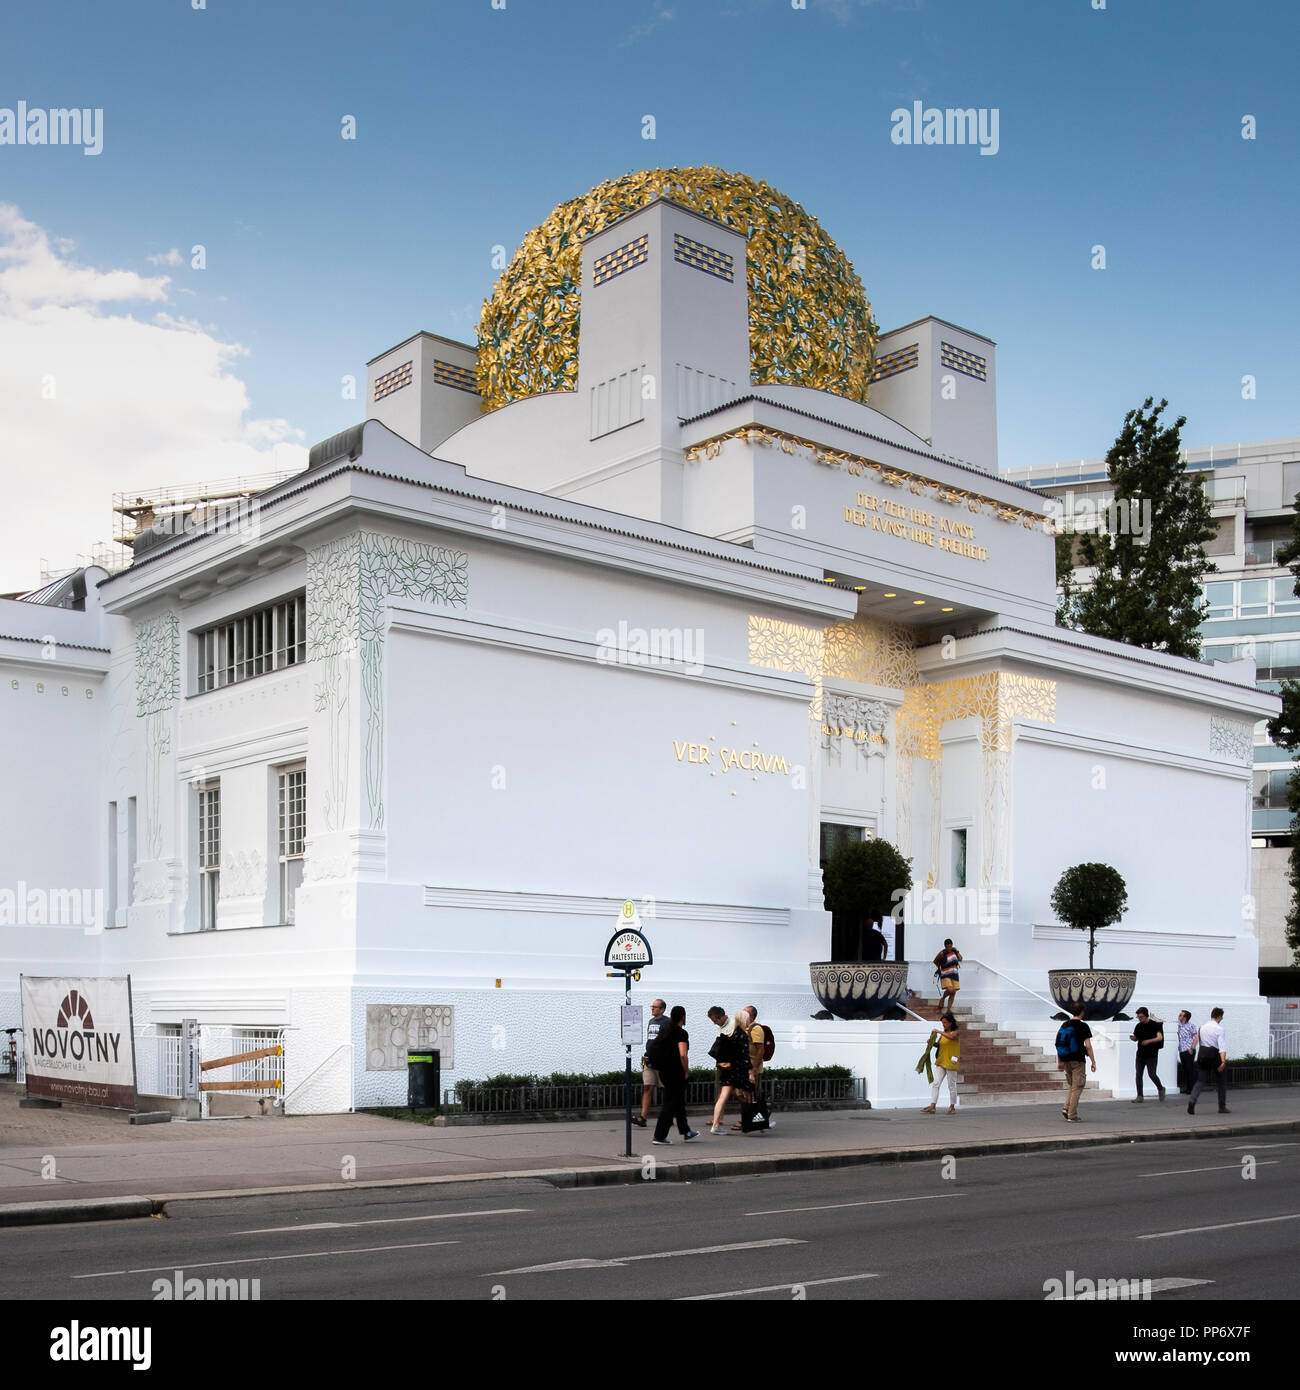 The secession building at Vienna, built in 1897 by Joseph Maria Olbrich for exhibitions of the secession group andThe Beethovenfries  by Gustav Stock Photo